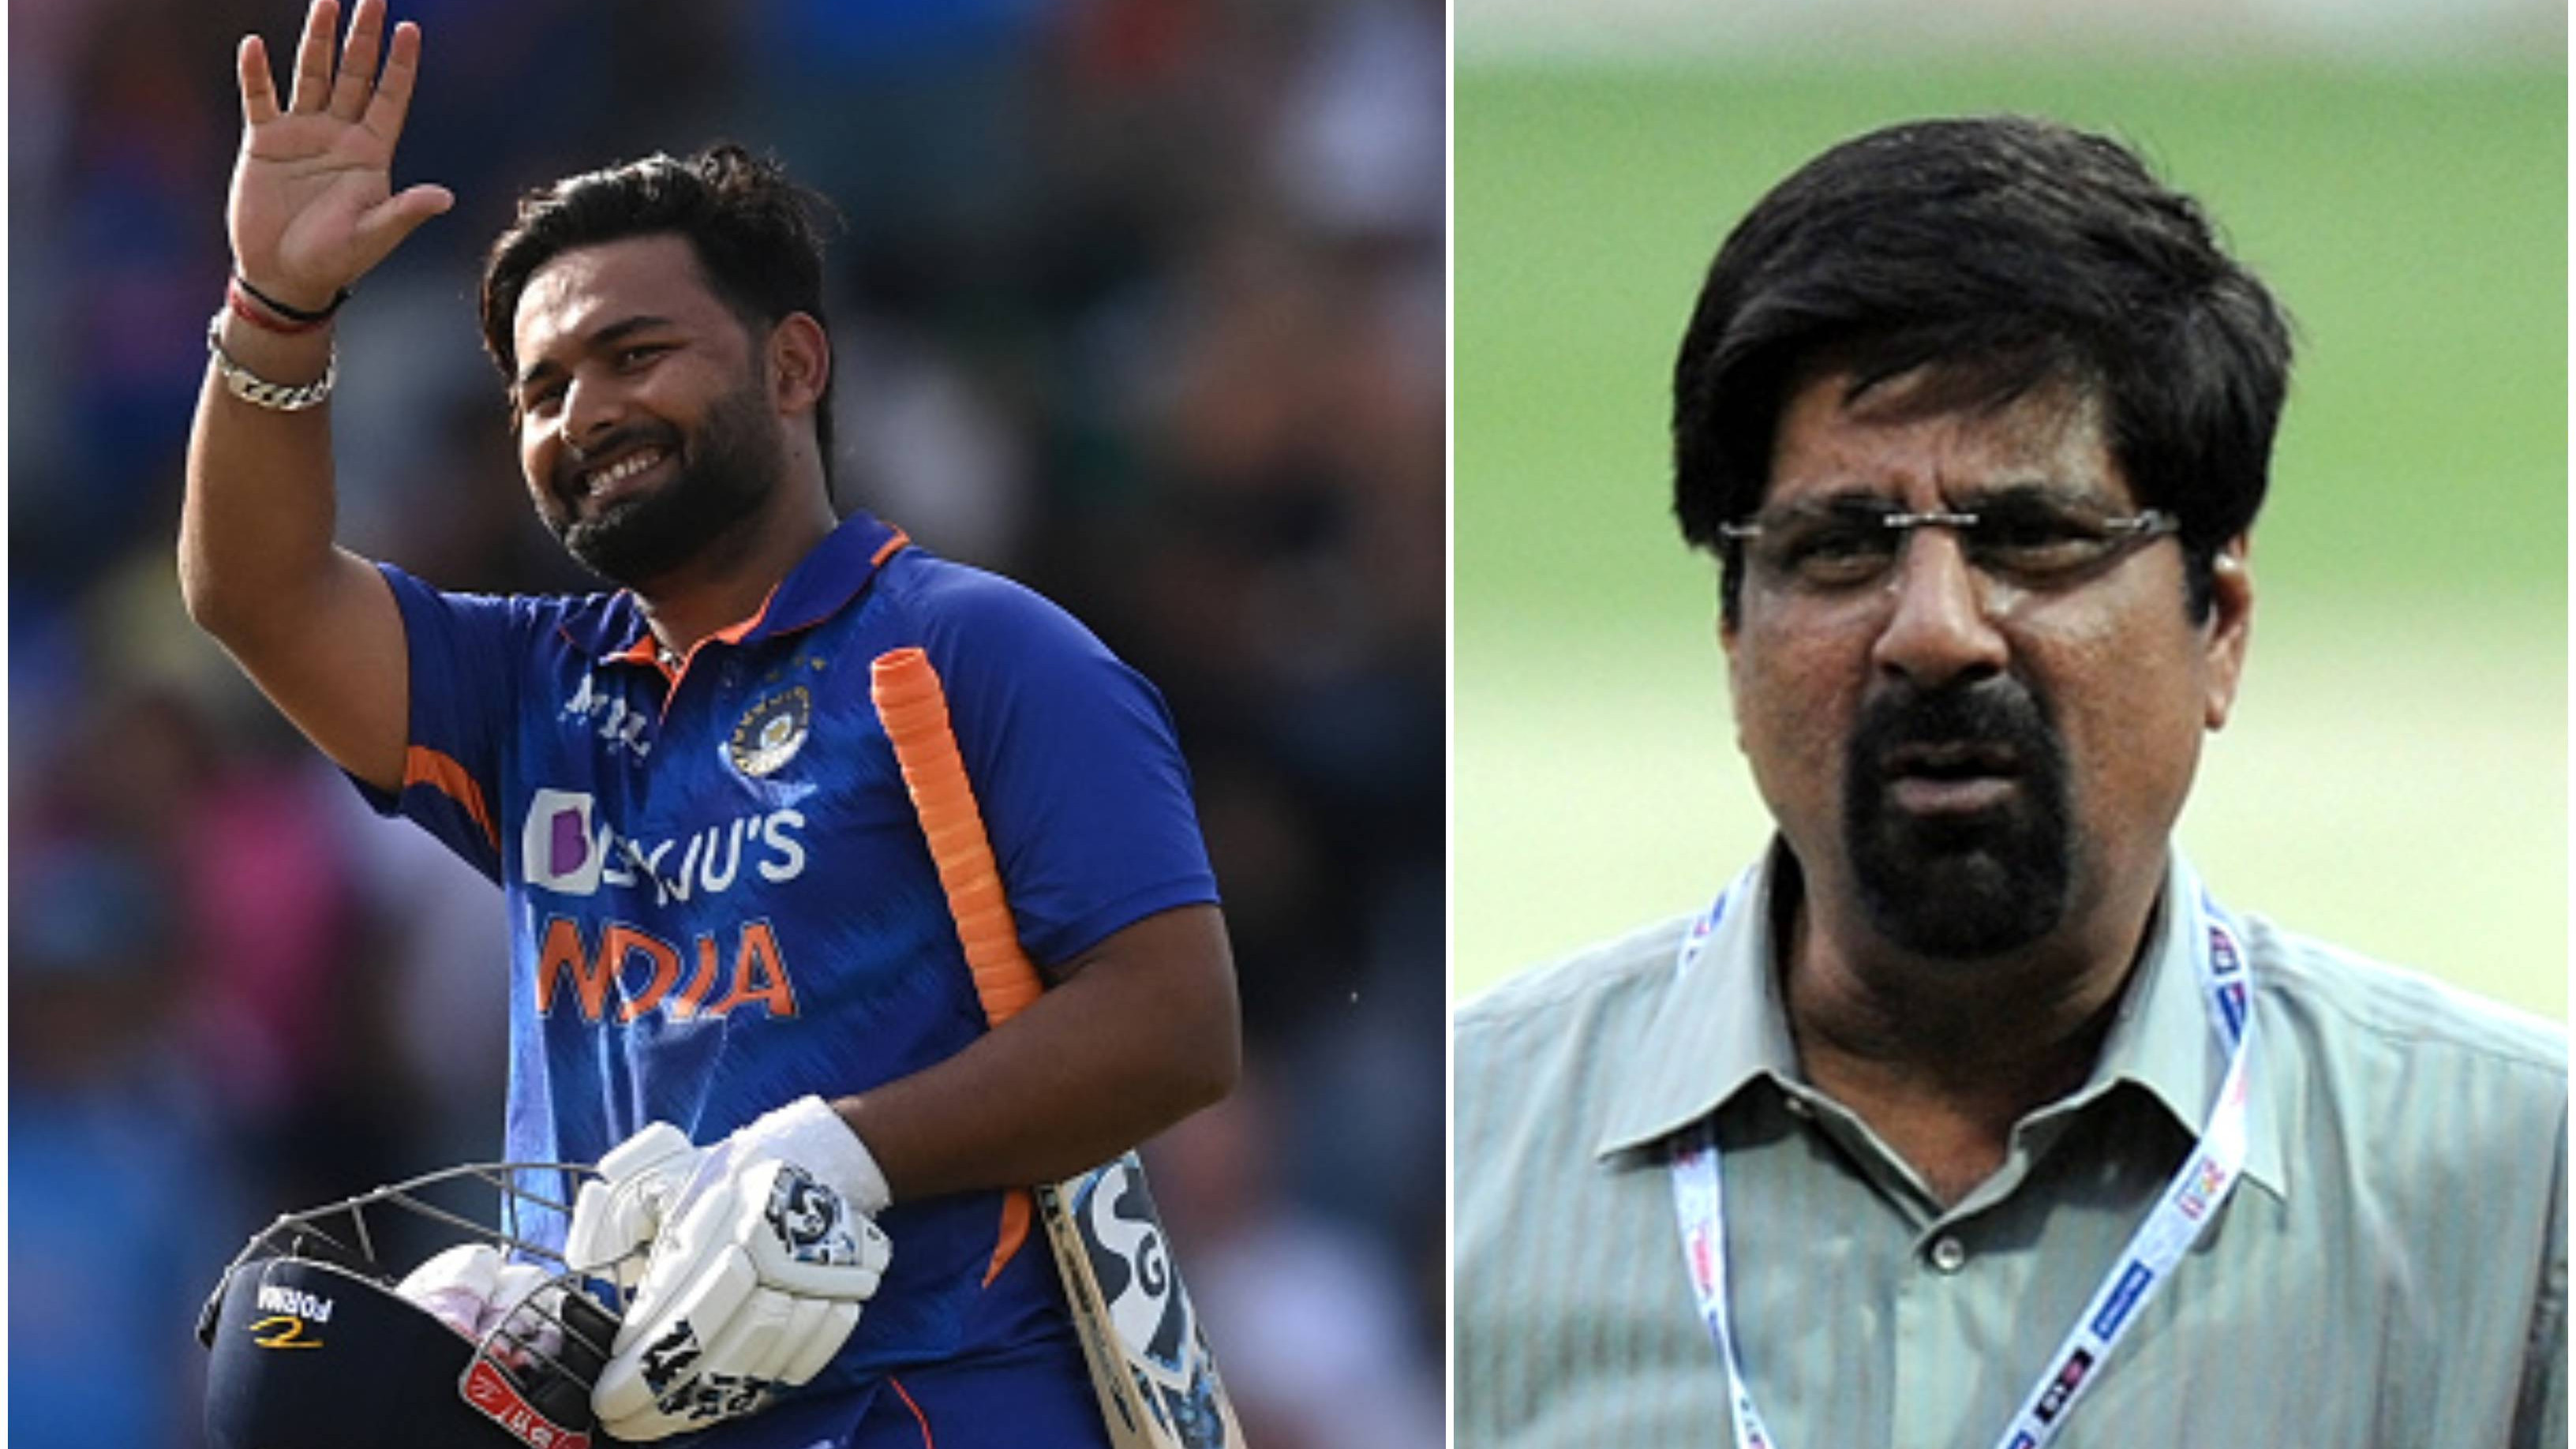 “If he was playing, I would straightaway say India are favorites”: Srikkanth on India’s chances at 2023 World Cup in Pant’s absence